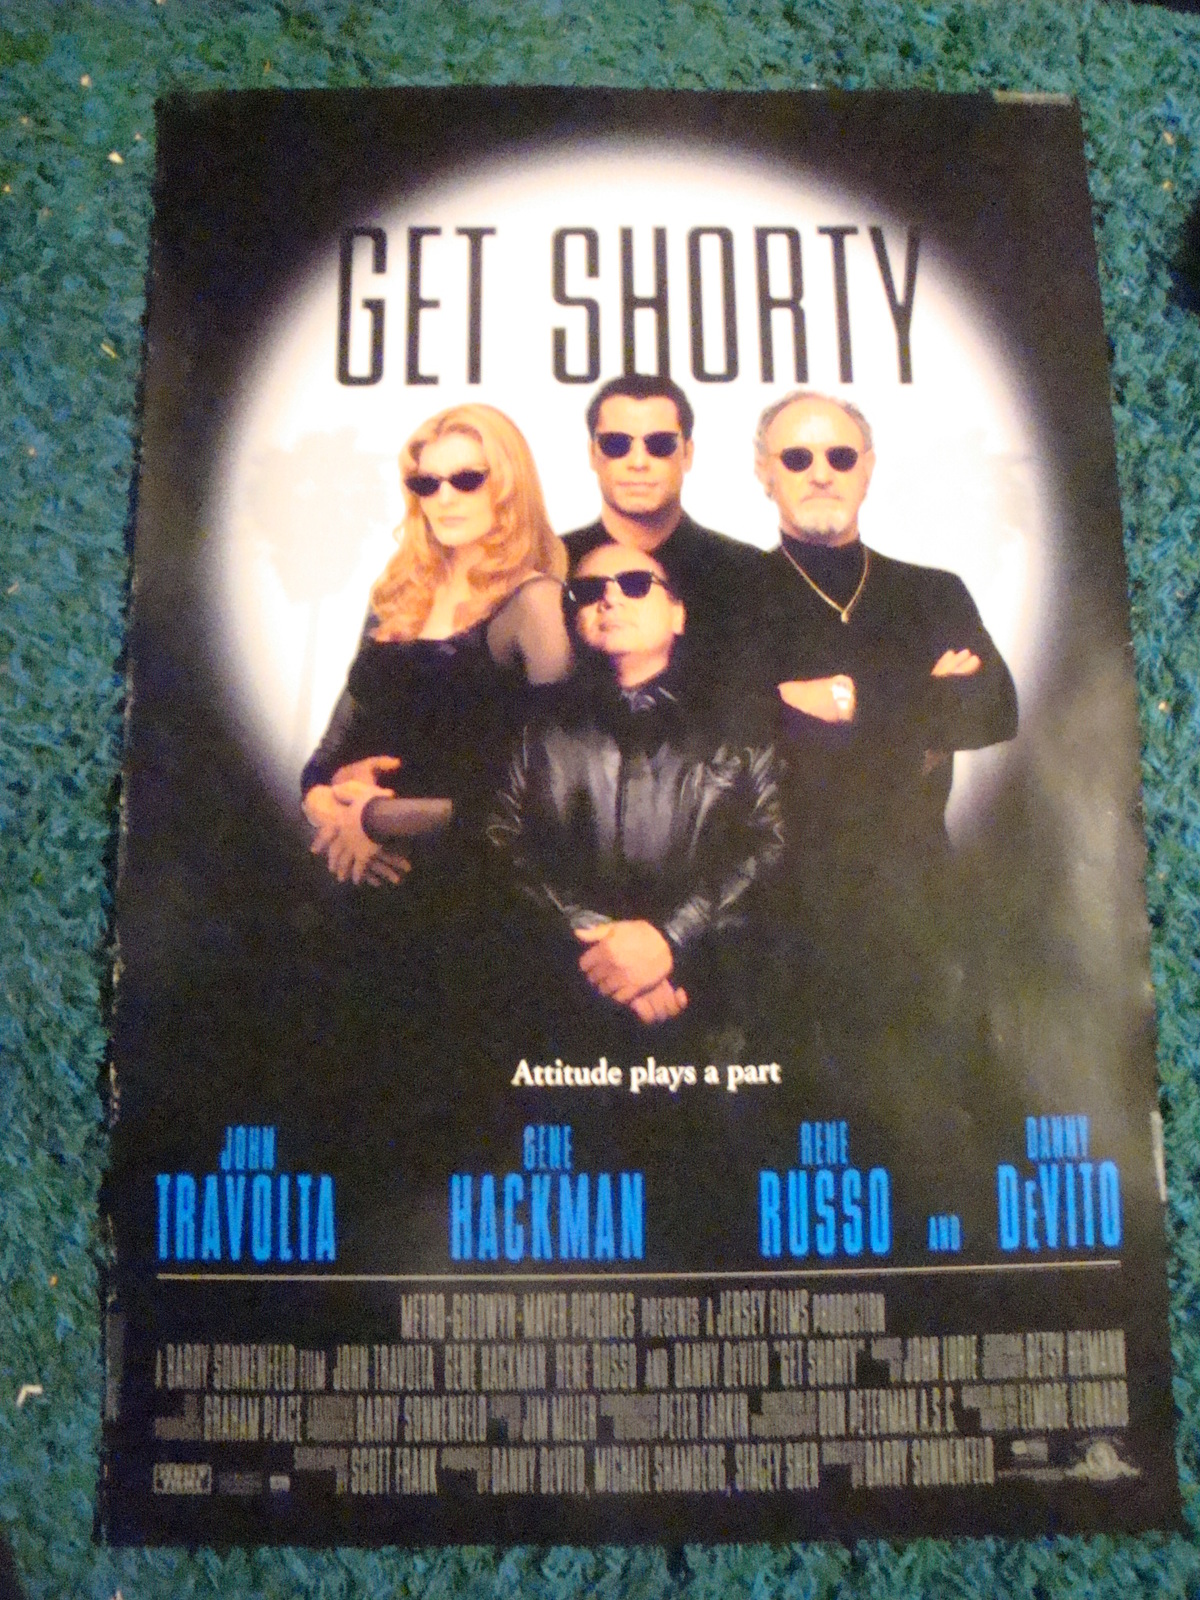 Primary image for GET SHORTY - MOVIE POSTER - WITH JOHN TRAVOLTA, DANNY DEVITO, GENE HACKMAN